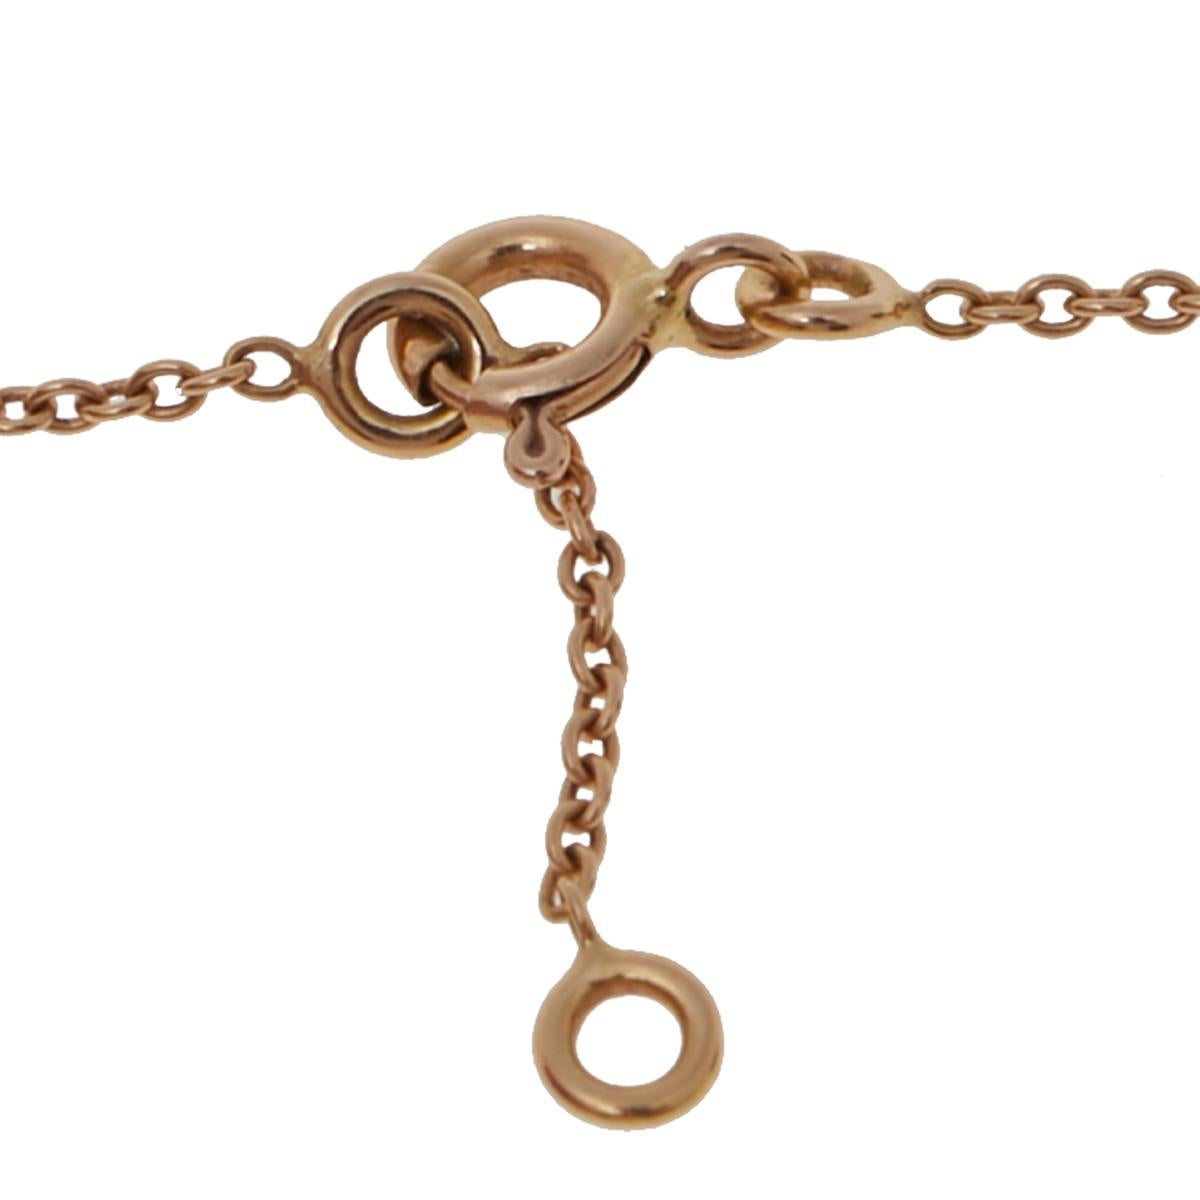 This Farandole necklace is from Hermes’ nautical-inspired ‘Chain d’Ancre collection.’ The collection was specifically designed to reflect the elegance of a boat’s chain-link line to its anchor. This necklace, crafted in 18k rose gold, features the